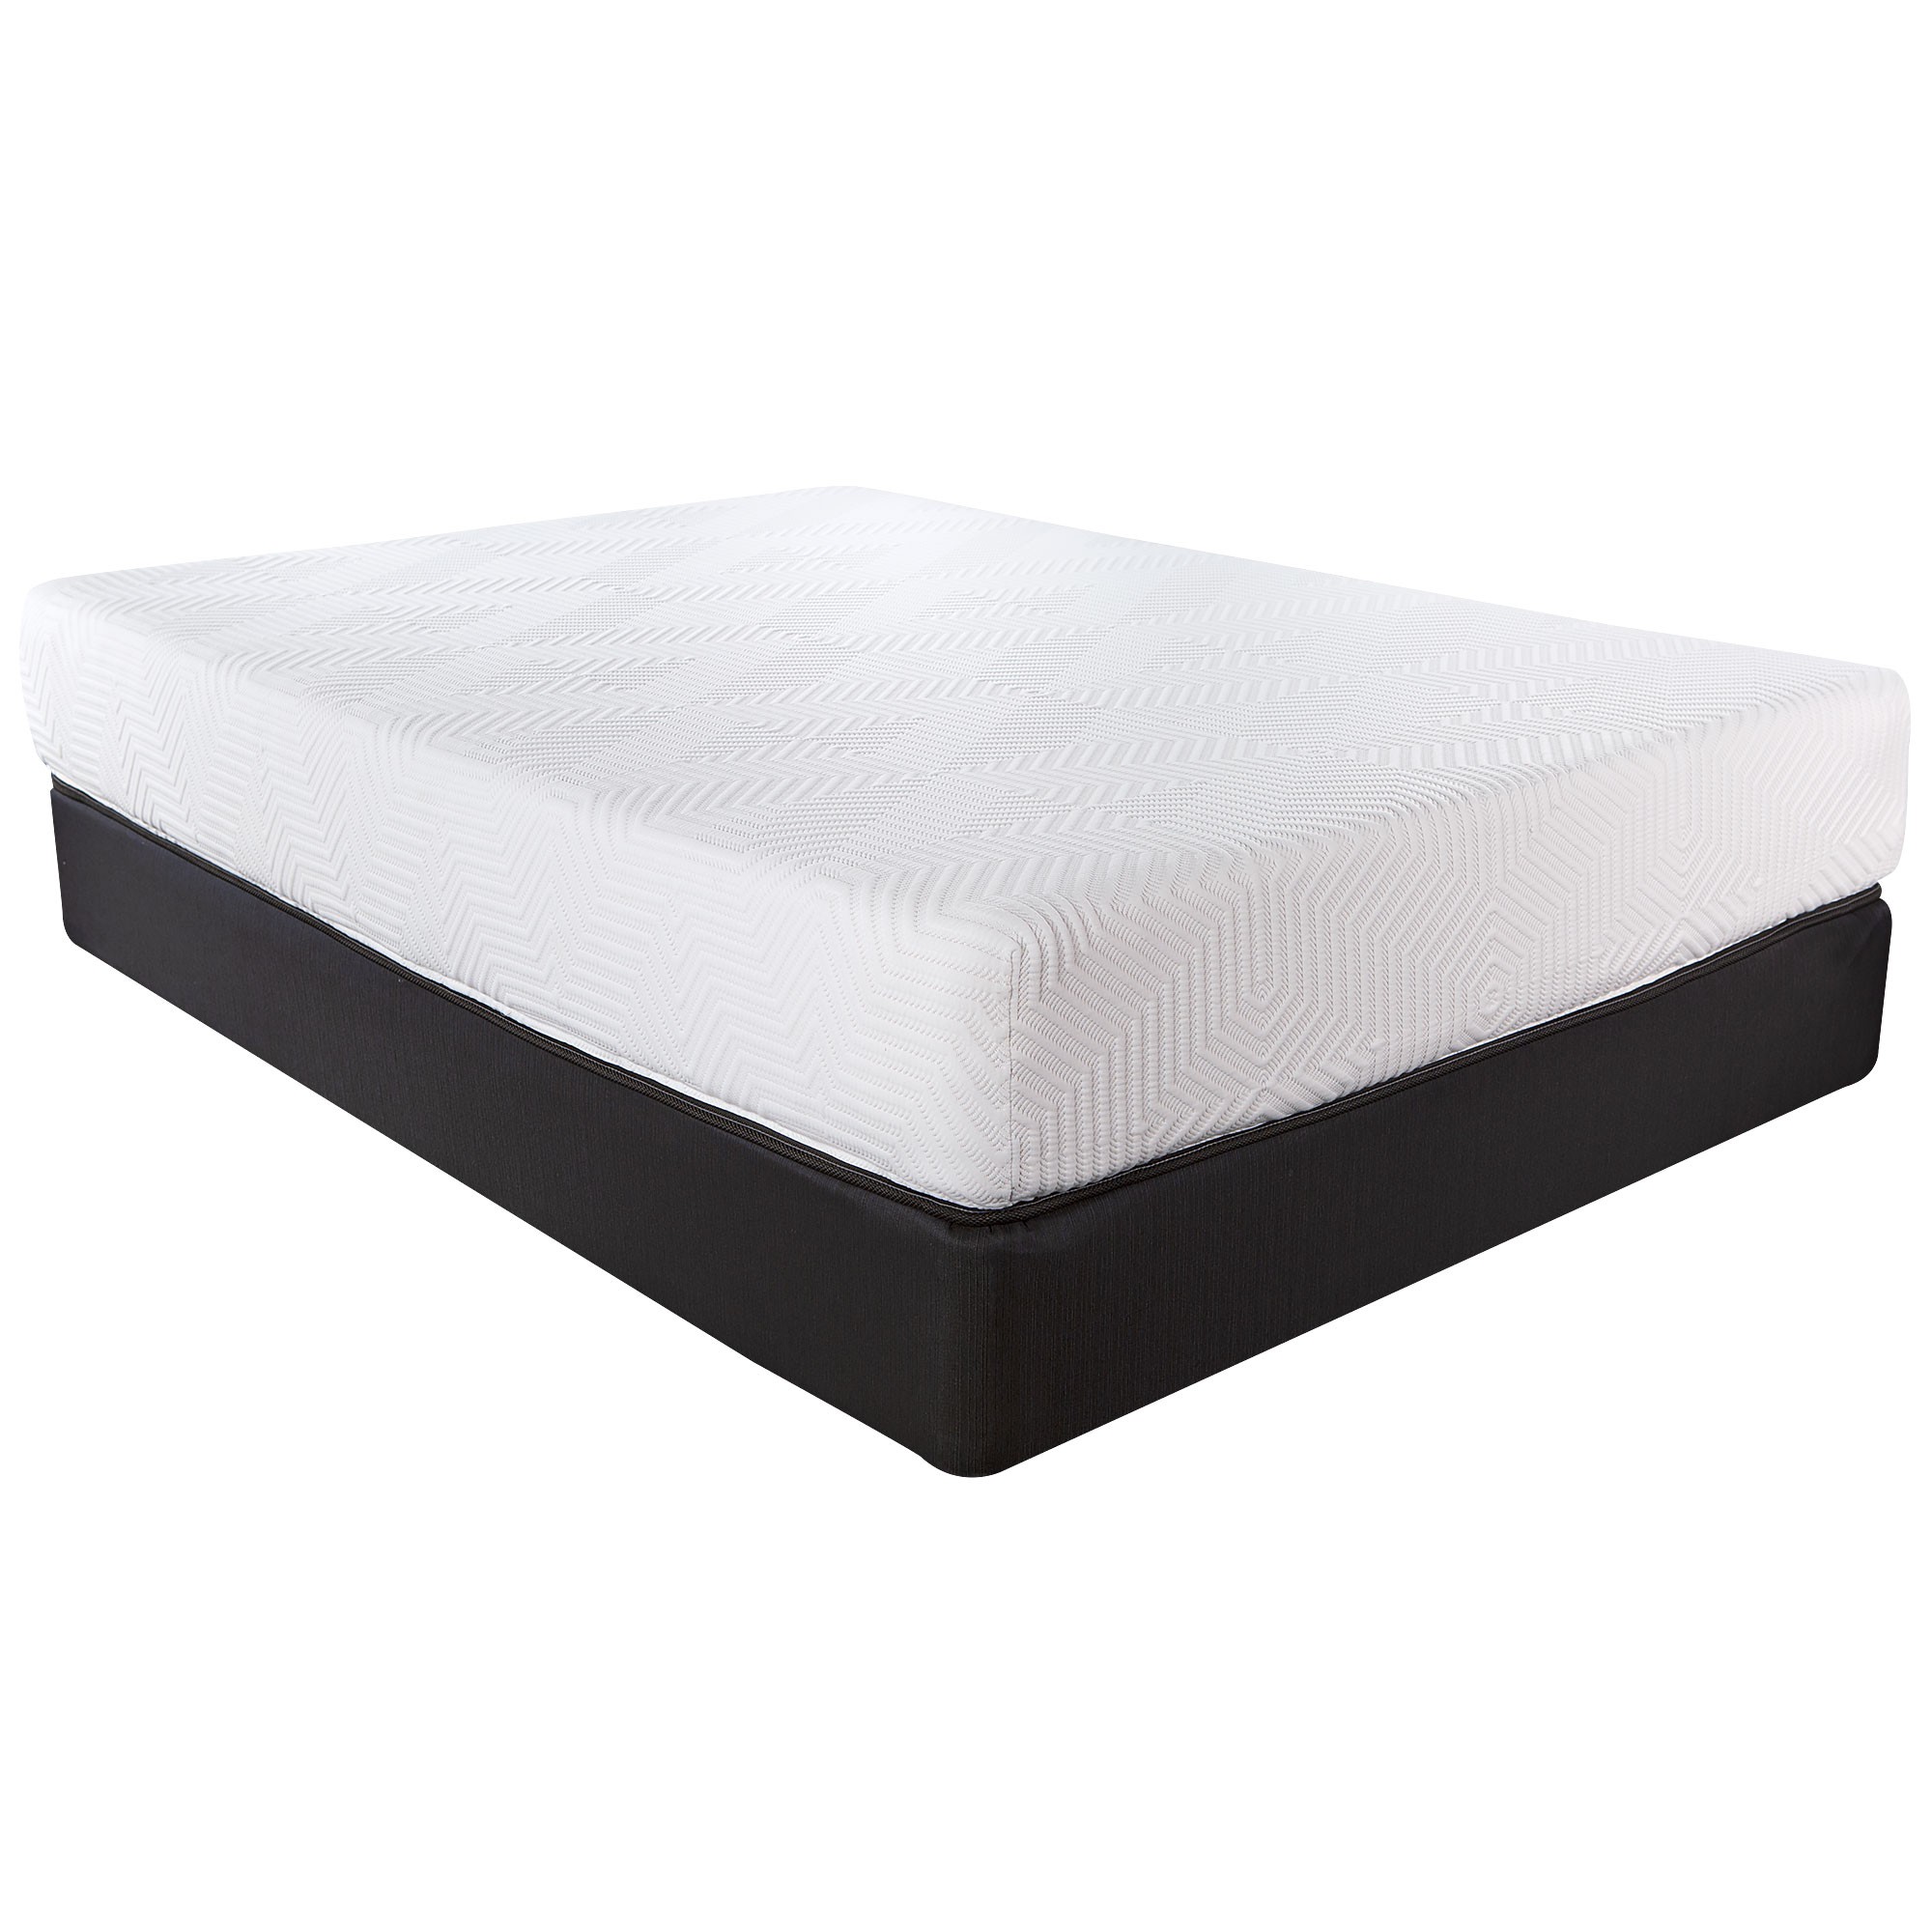 10.5" Hybrid Lux Memory Foam And Wrapped Coil Mattress Queen-391684-1